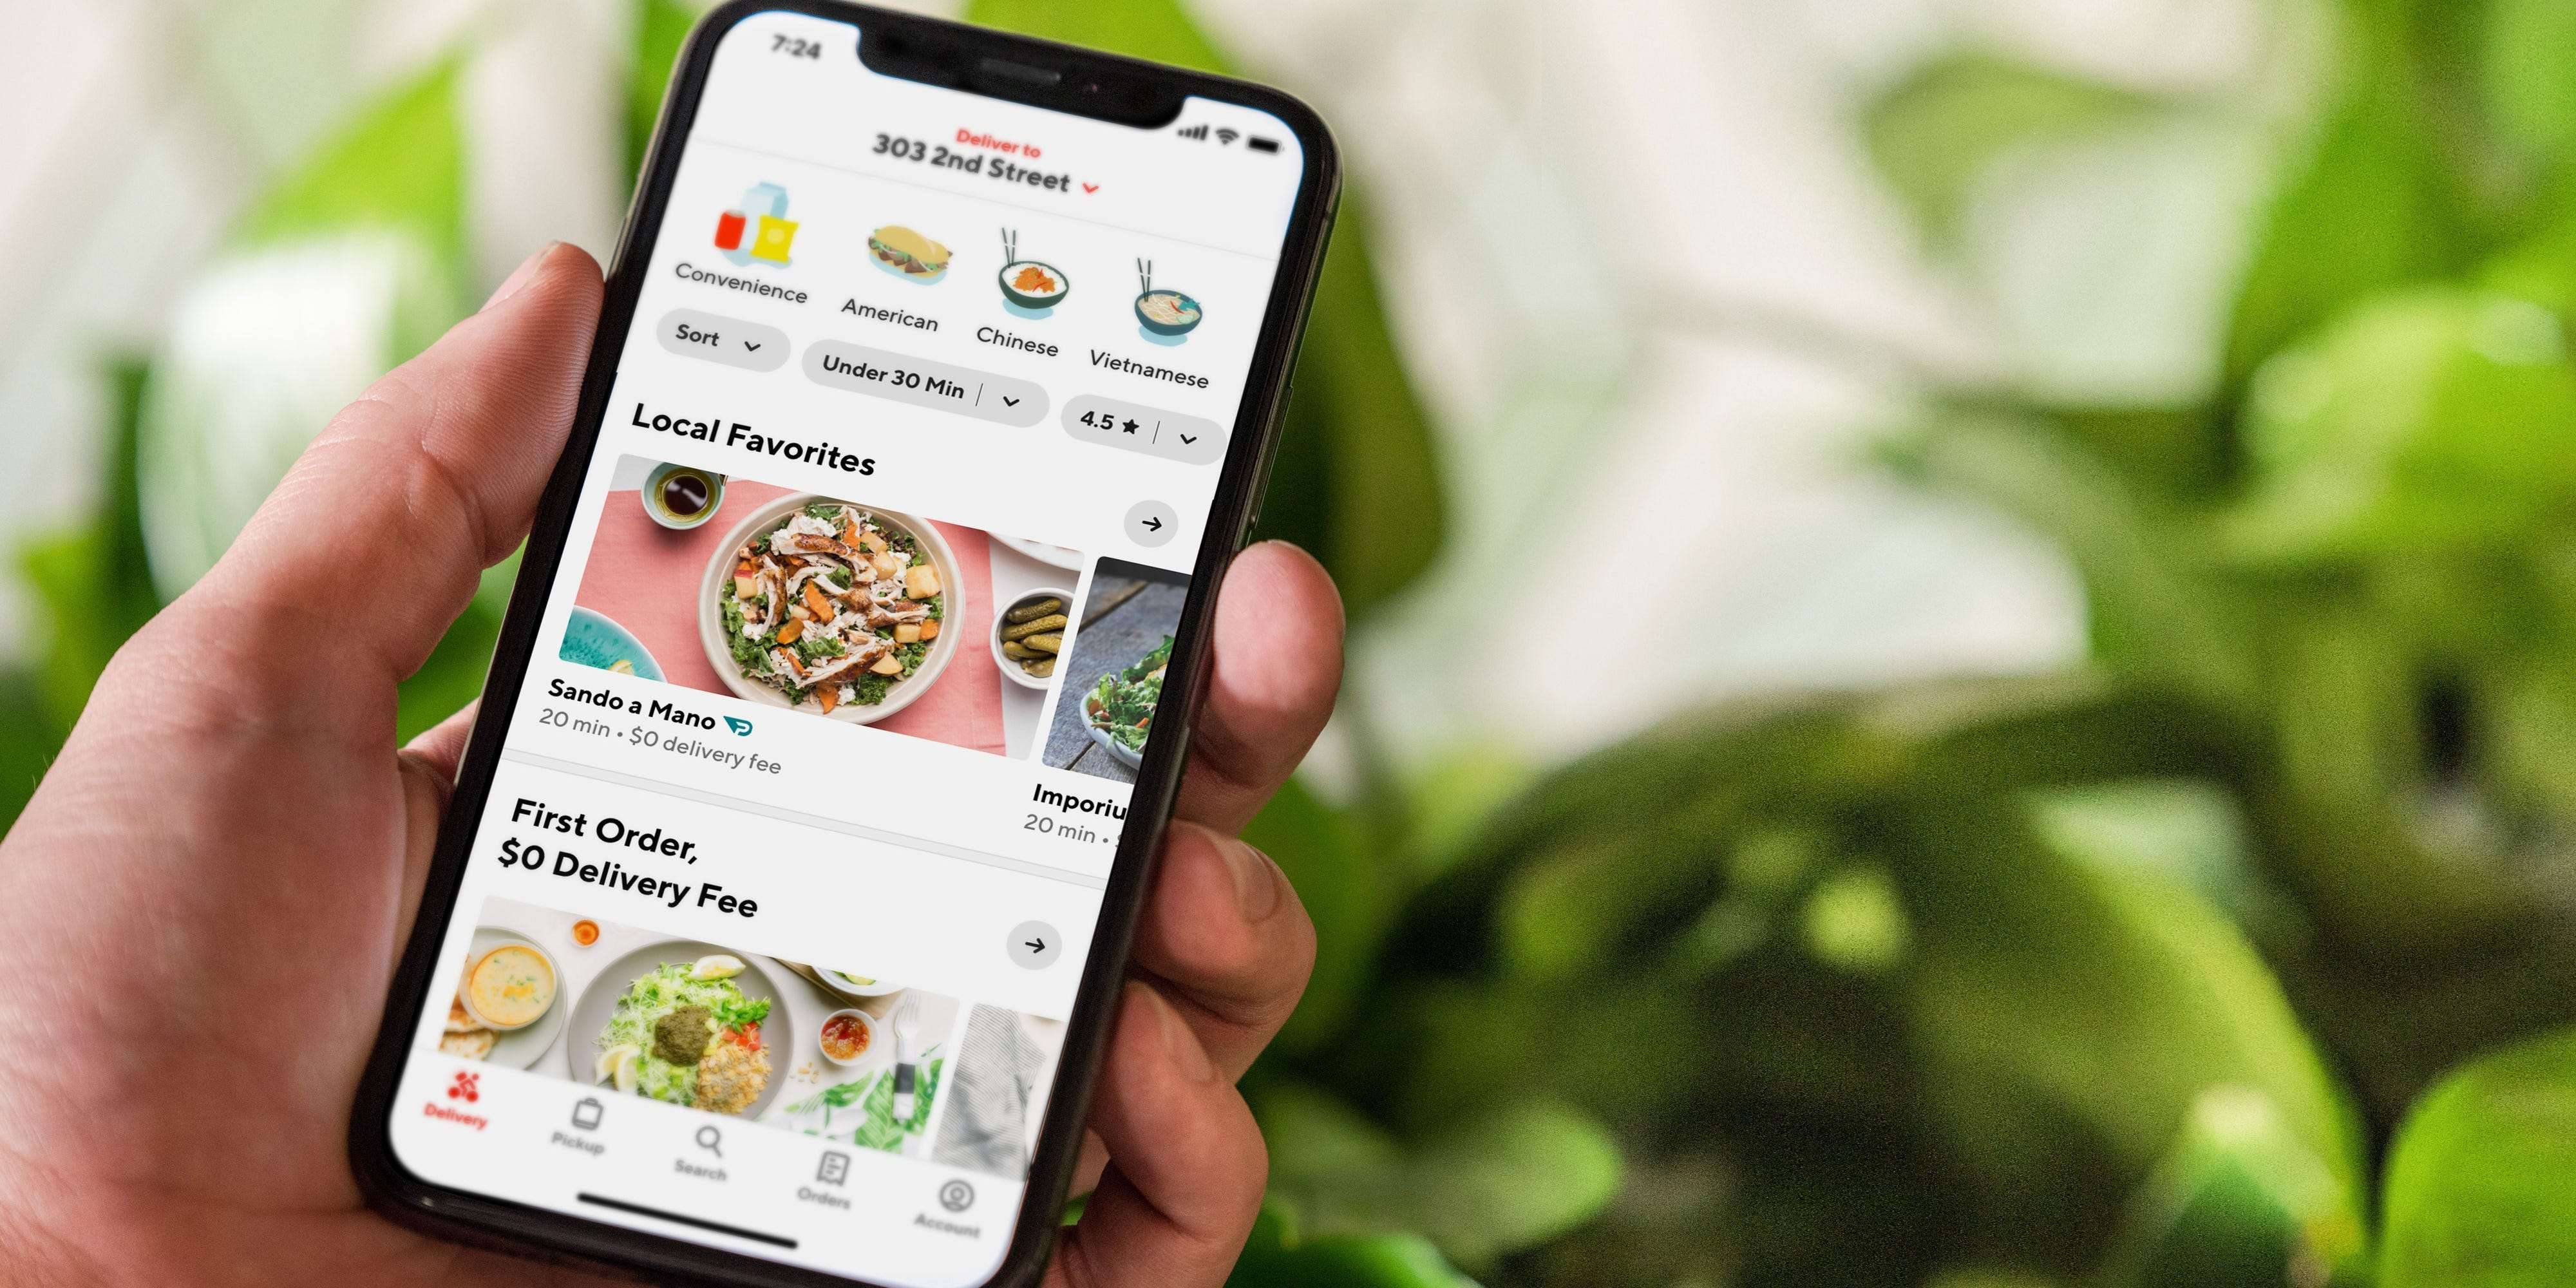 How To Add A Tip On Doordash And Adjust It After Delivery